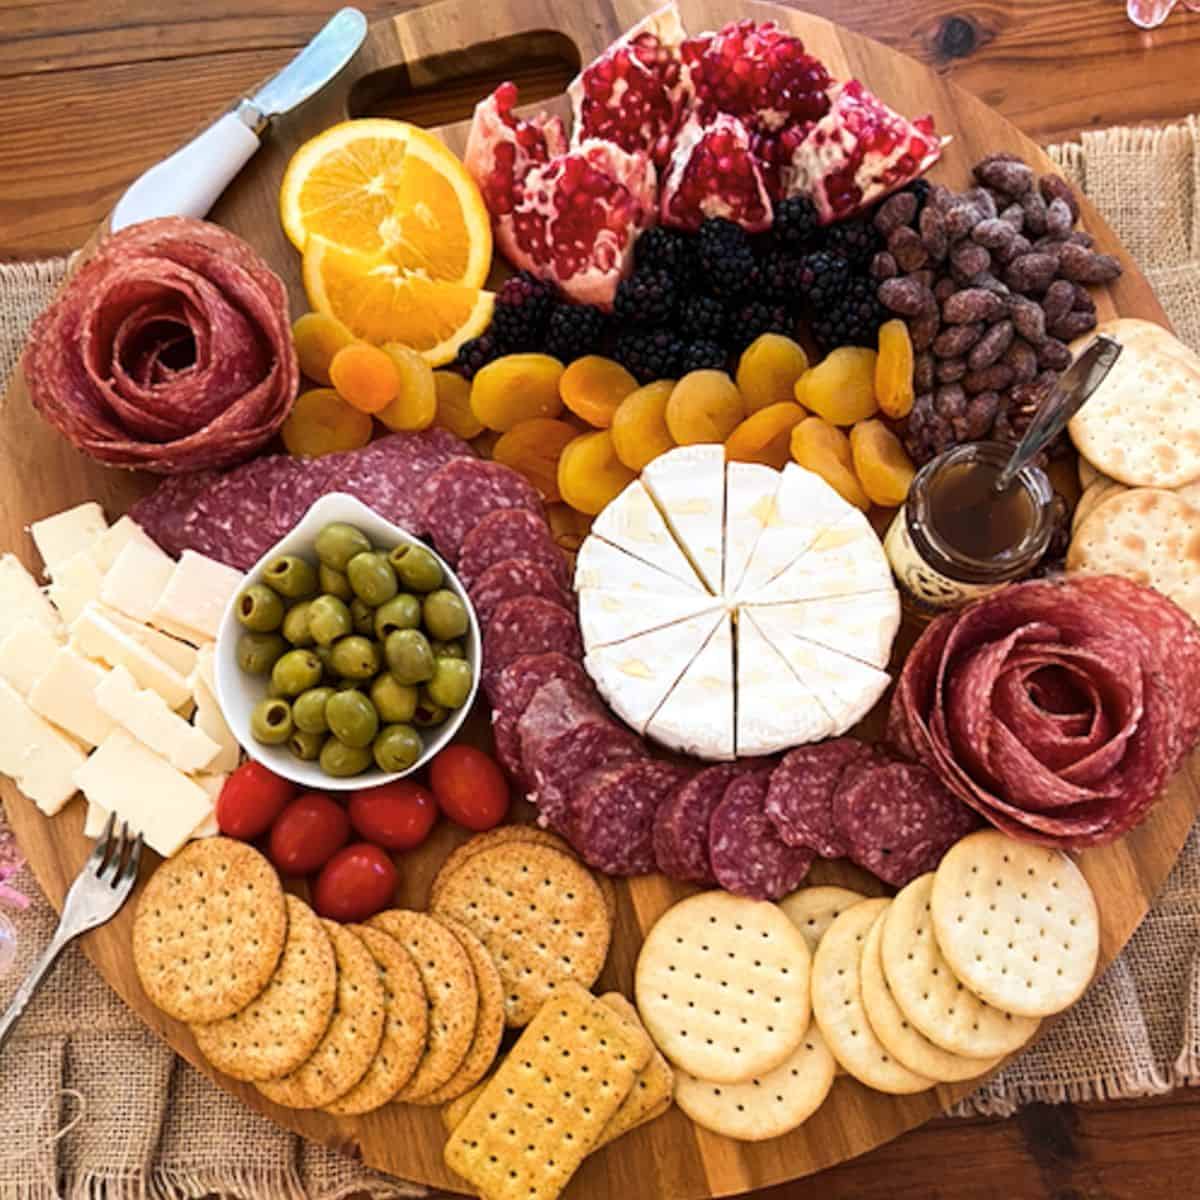 charcuterie board filled with fruit, crackers, meat, chocolate, cheese, etc.